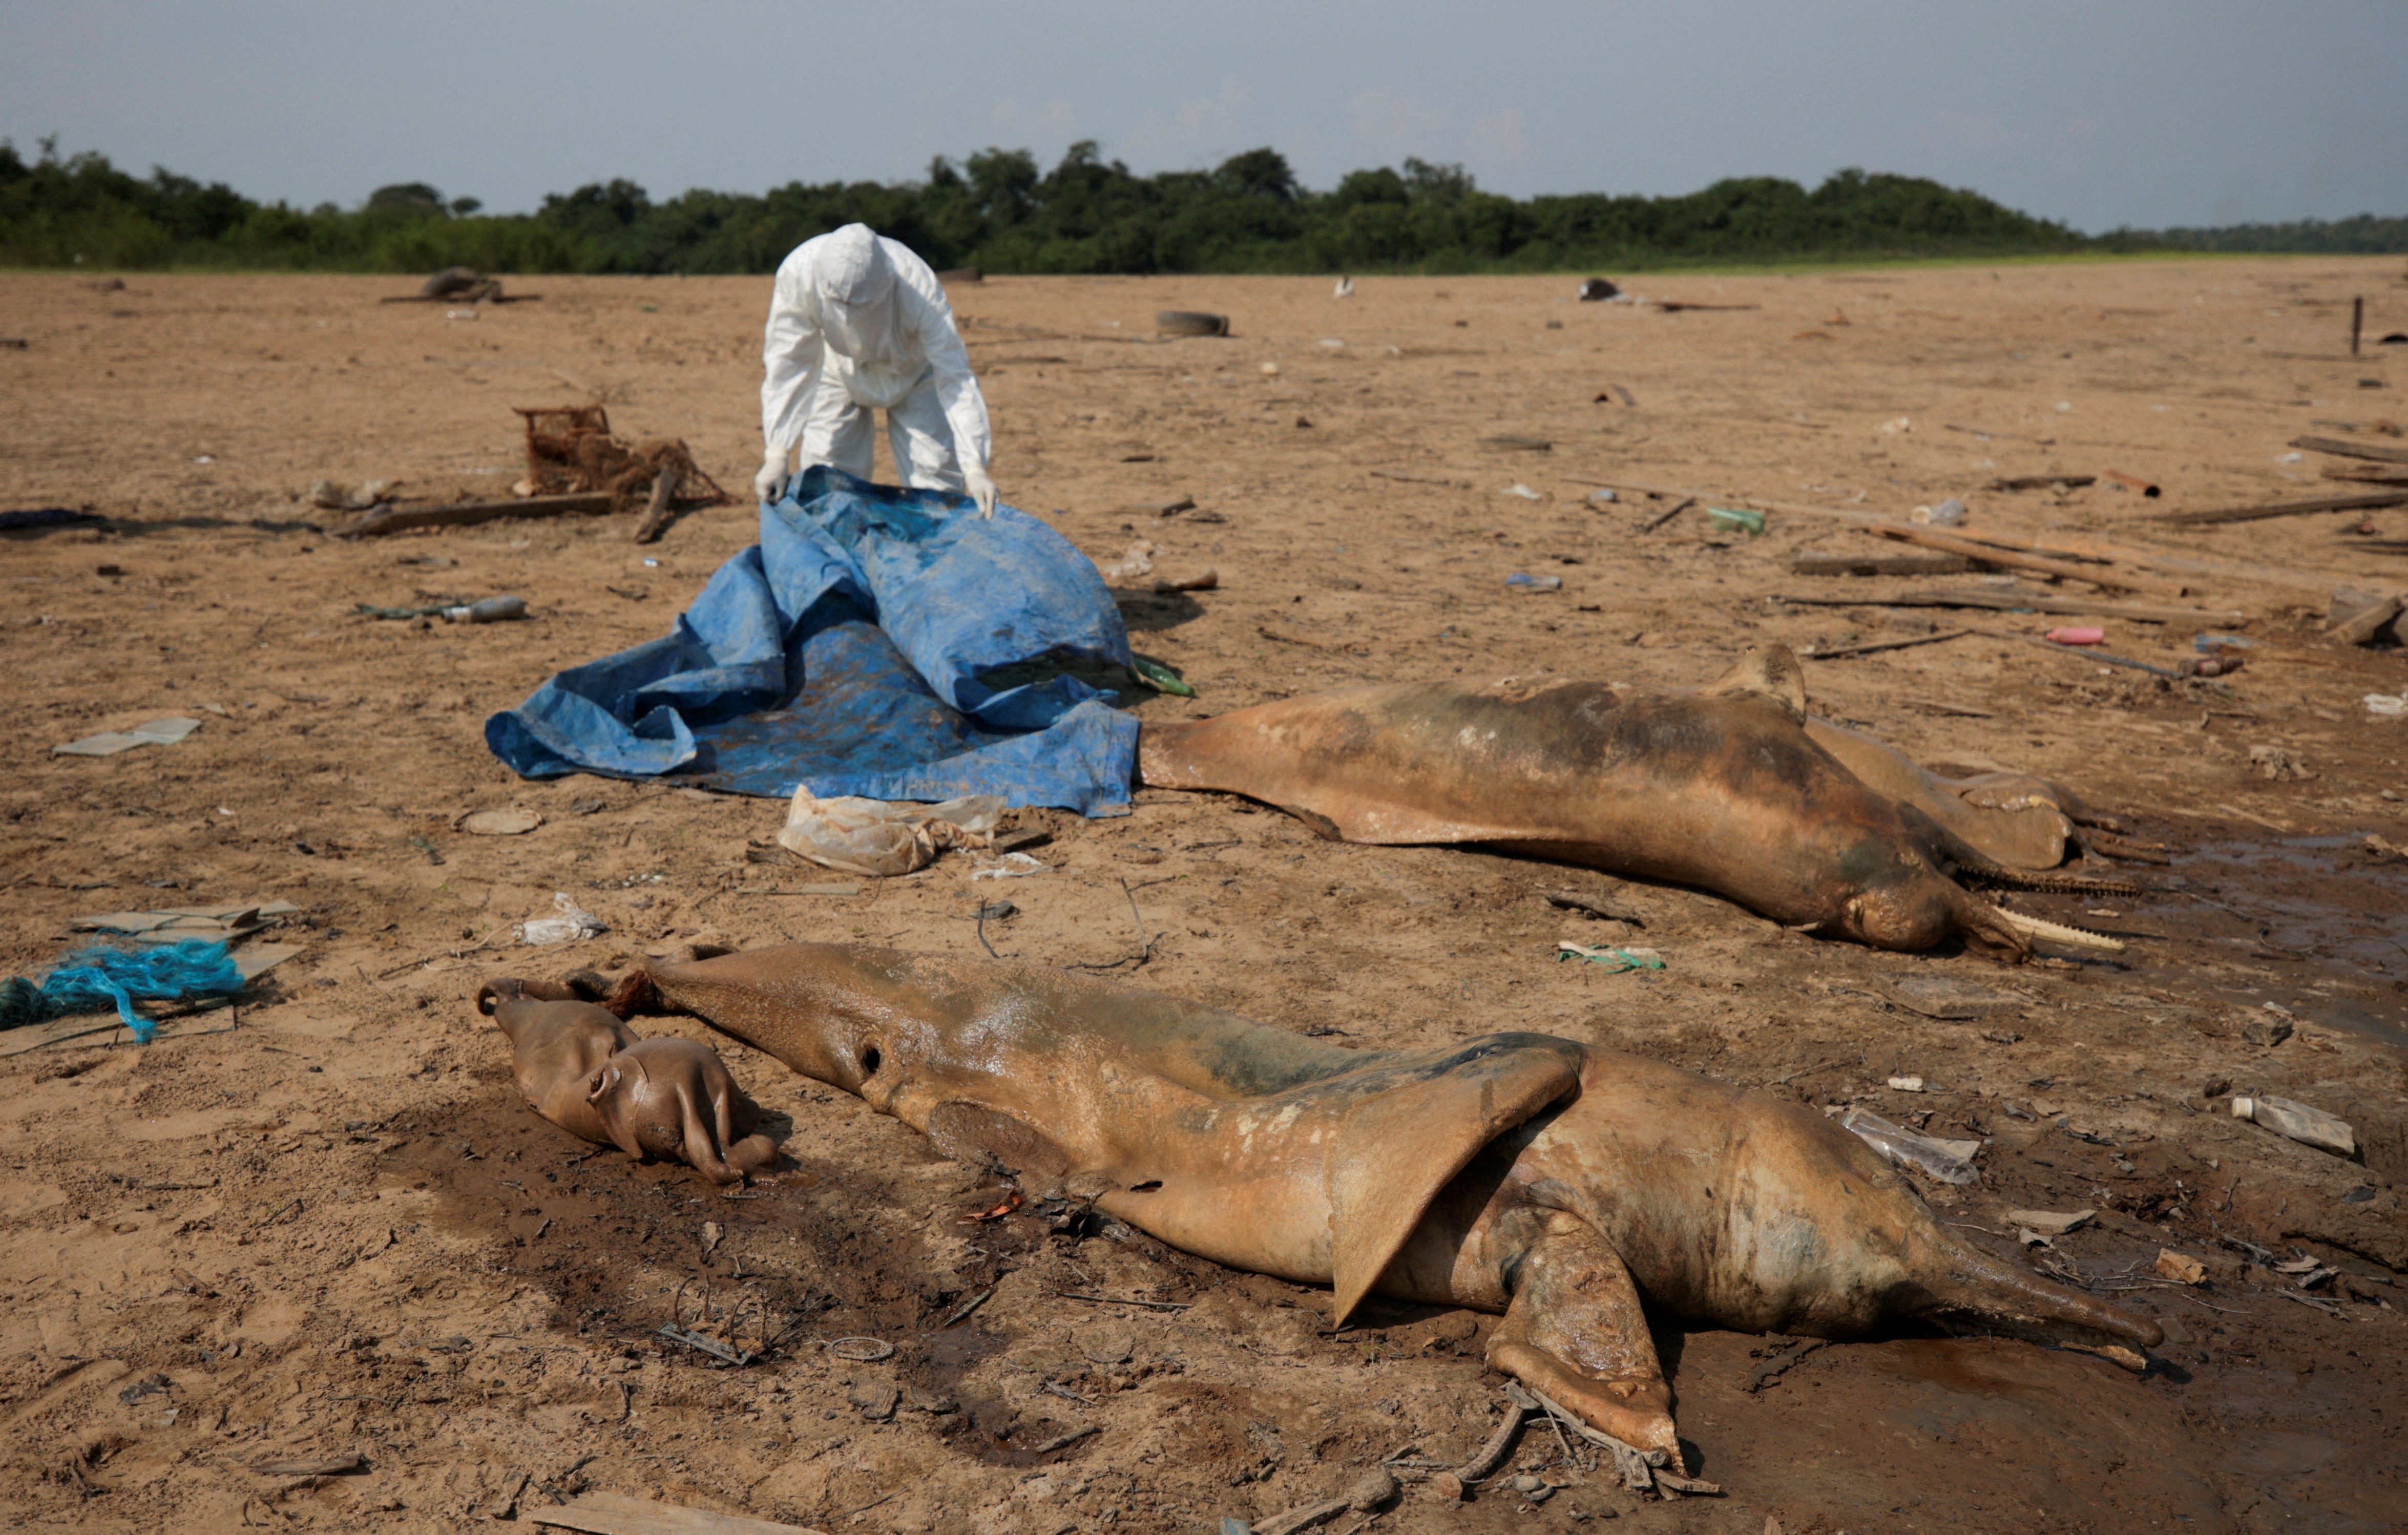 A researcher from the Mamiraua Institute for Sustainable Development retrieves dead dolphins from Tefe lake